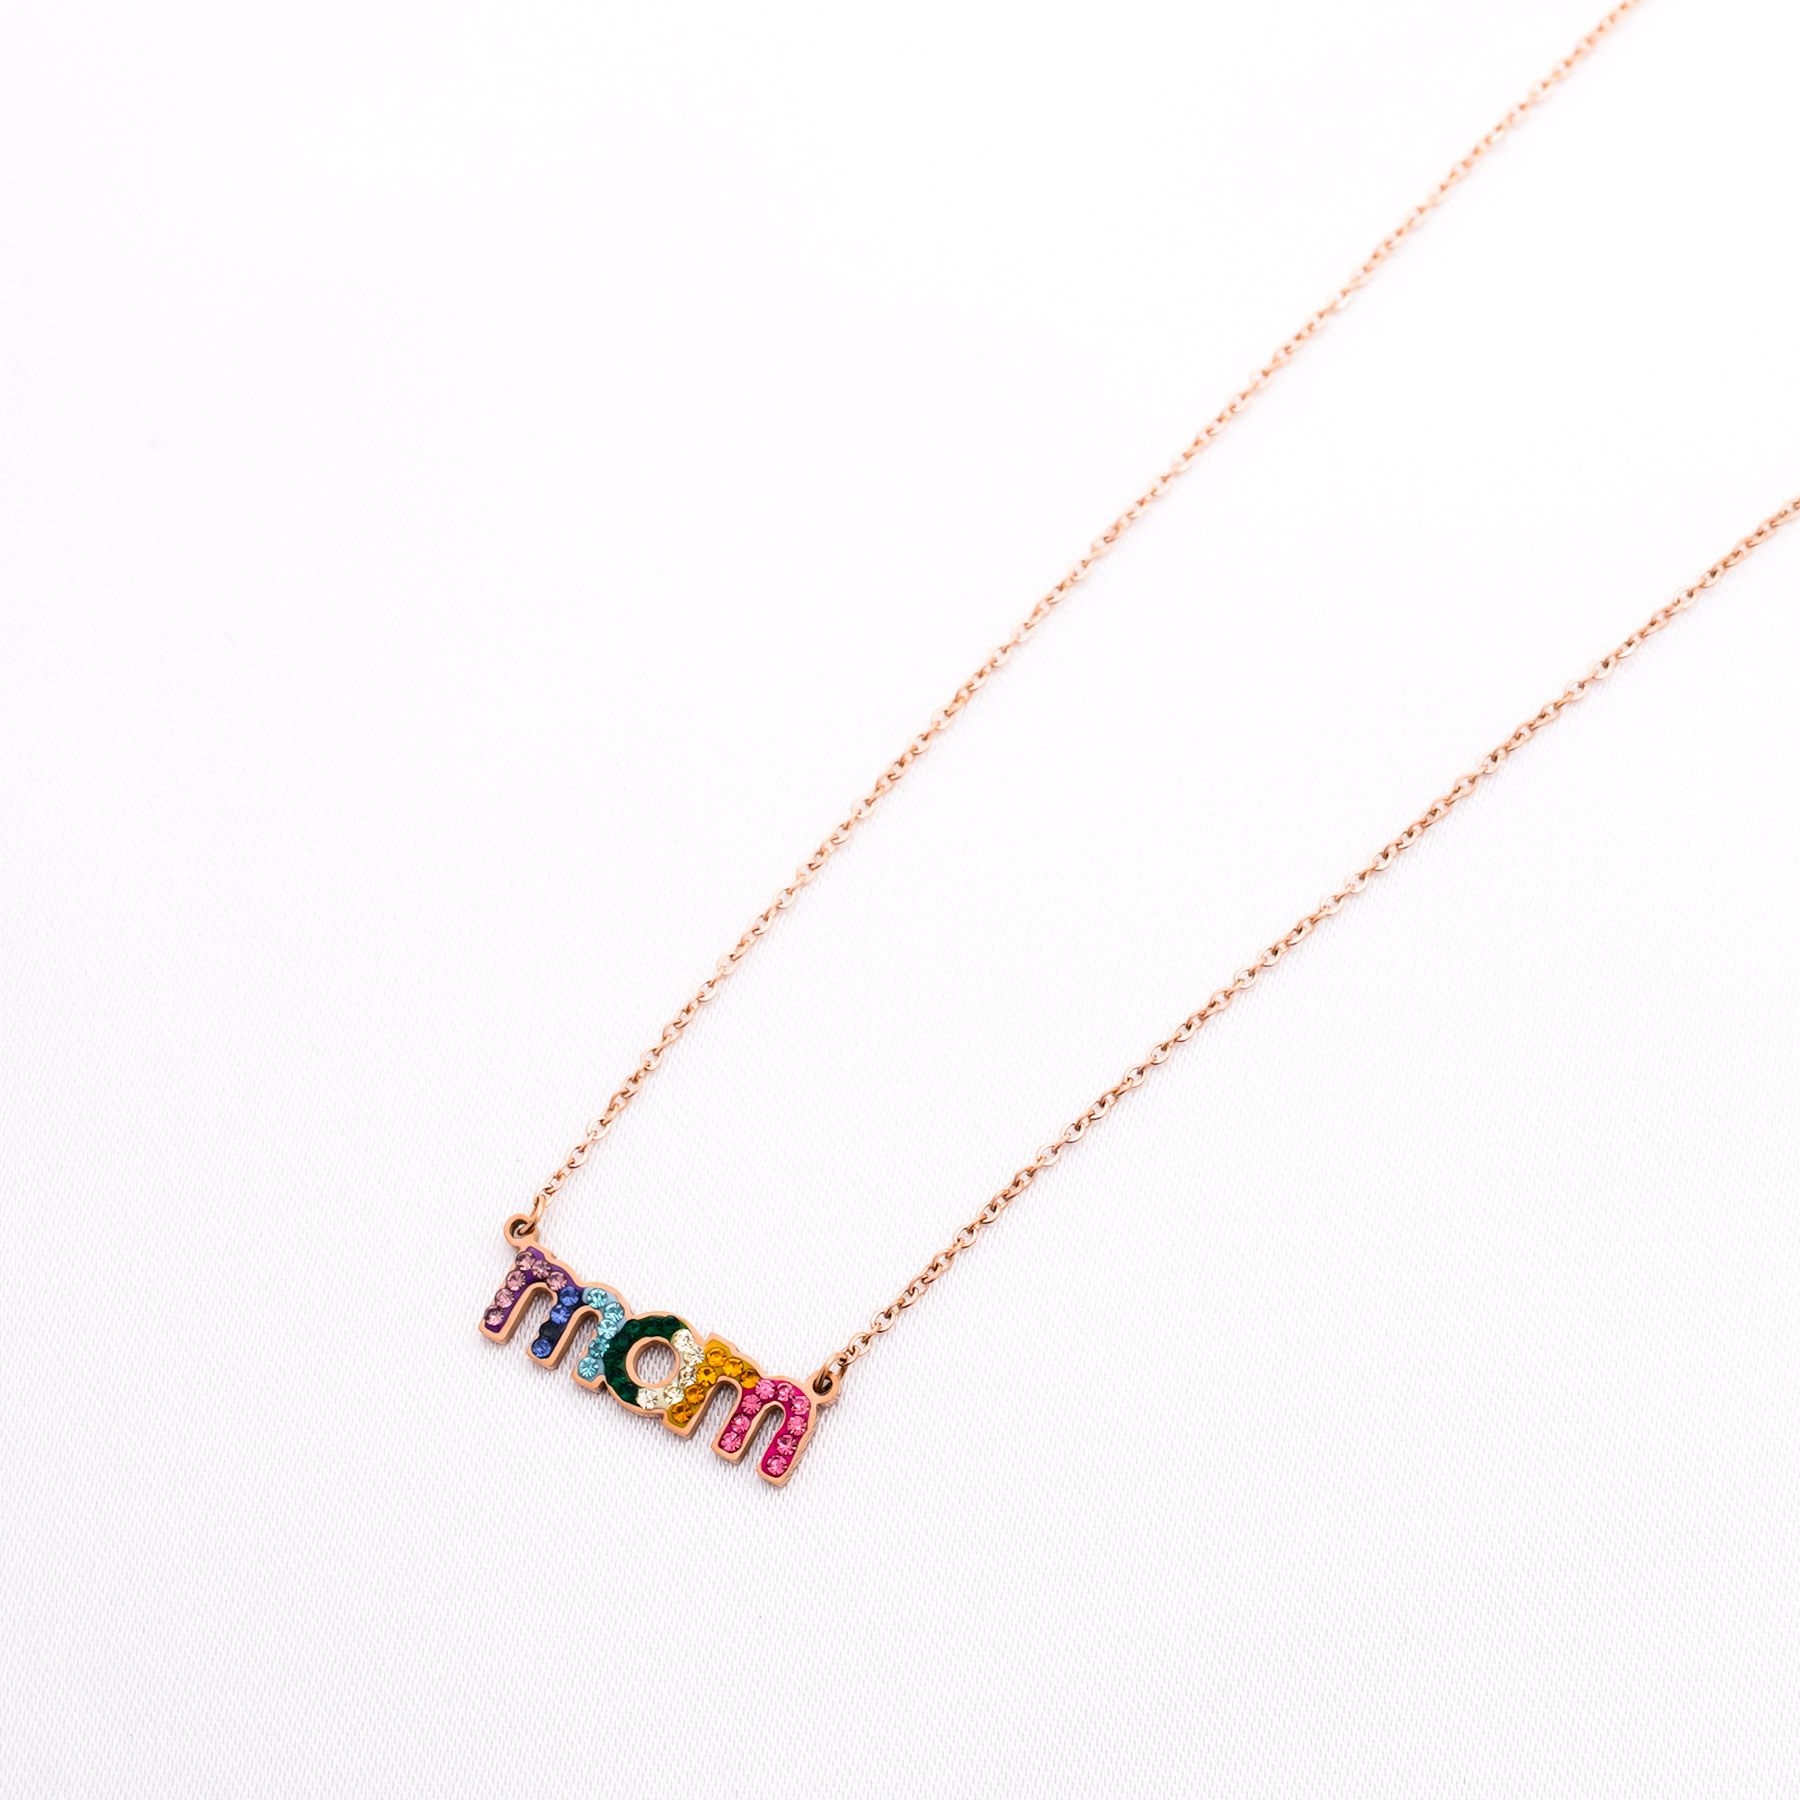 MOM NECKLACE - ROSE GOLD  ' - ' ΜΑΜΑ - ΝΟΝΑ